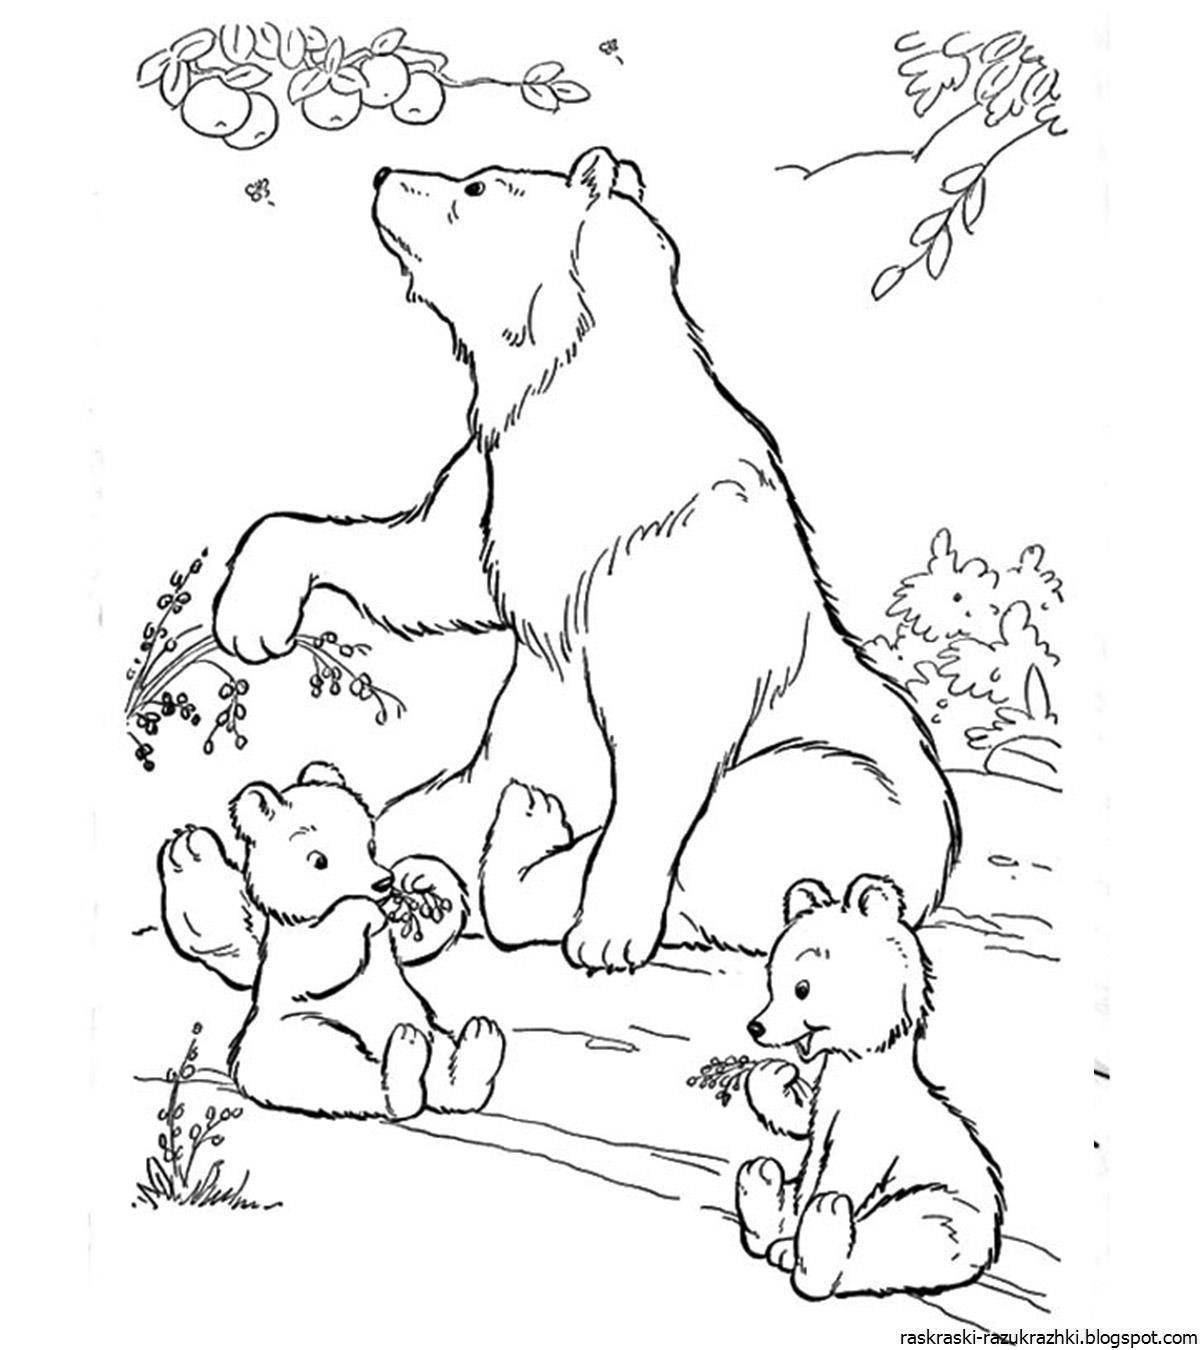 Two greedy teddy bears funny coloring book